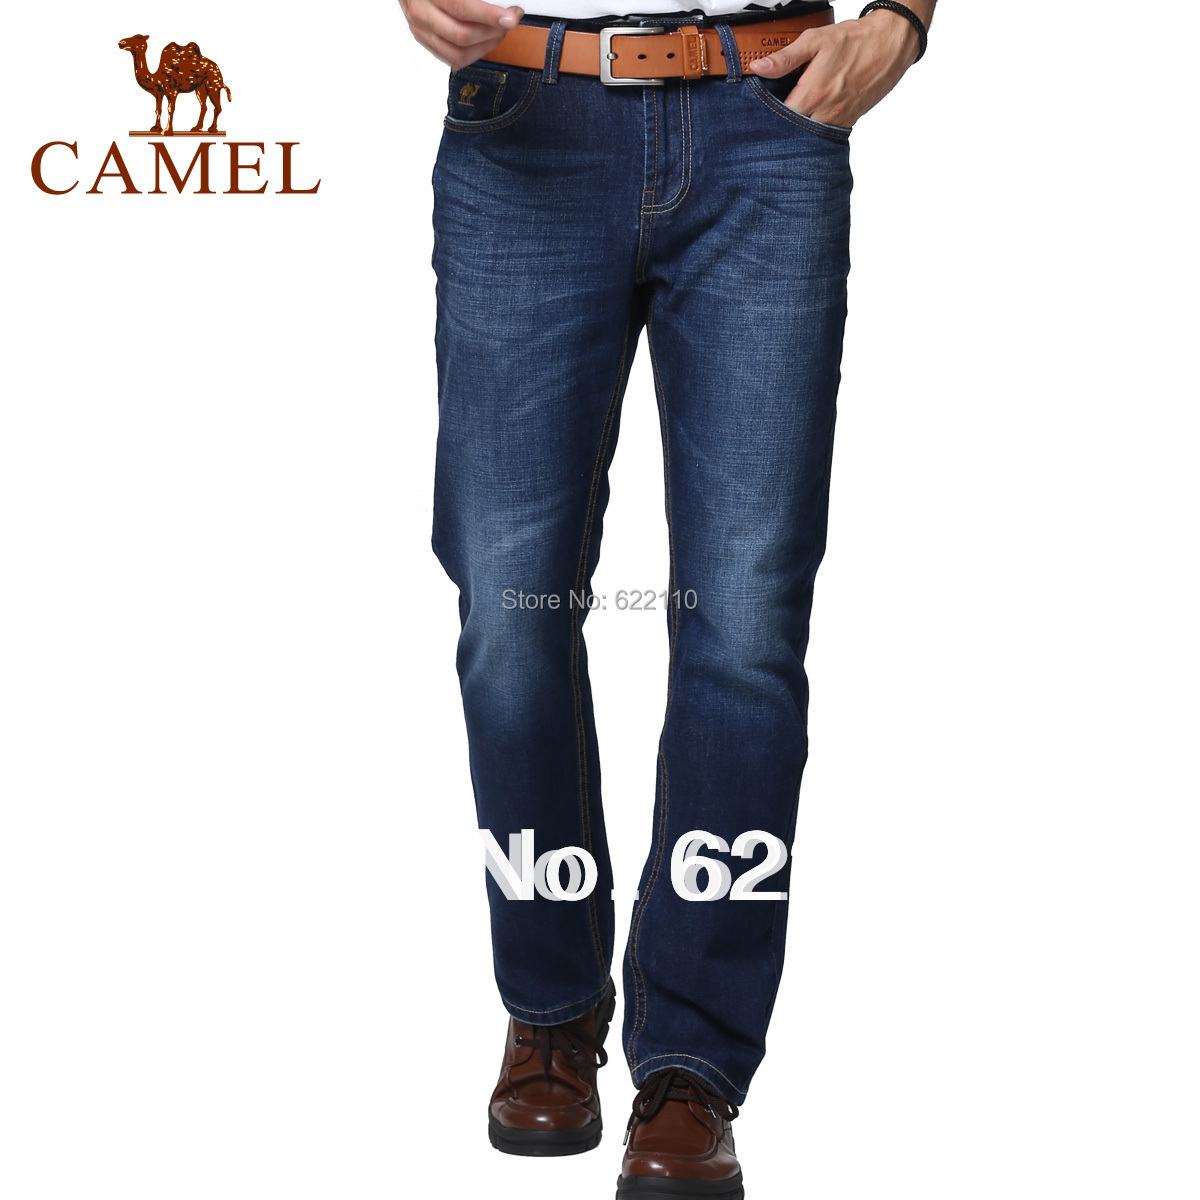 Camel outdoor 2013 water wash jeans male 100% jeans cotton straight pants ;Comfortable mature men long Jean ,in stock3f66101